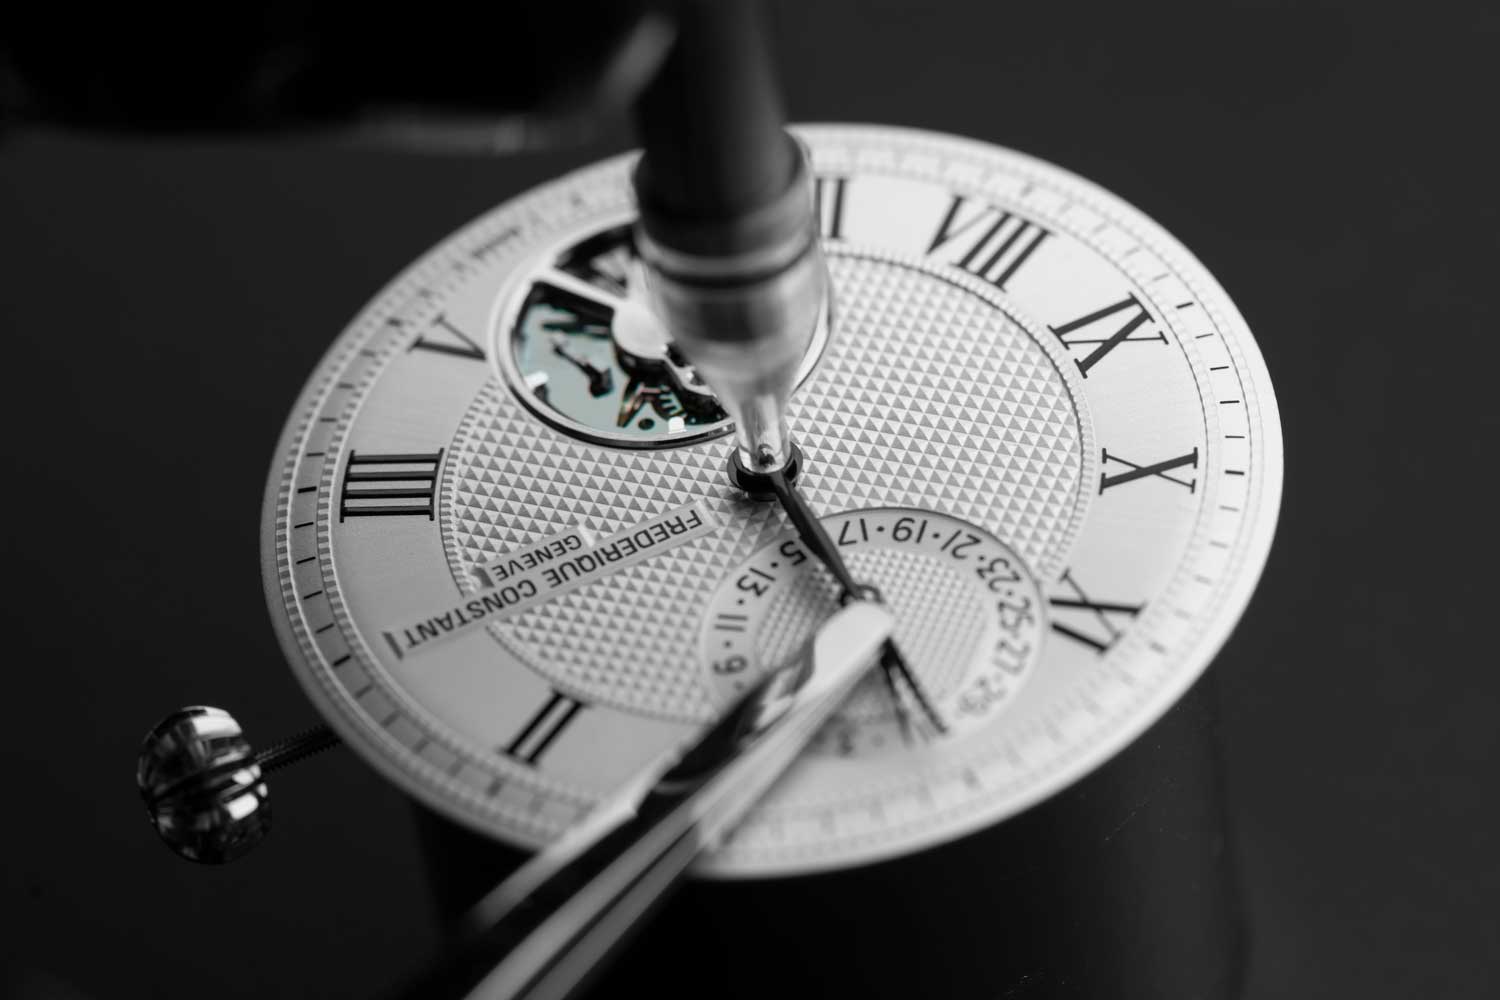 The dial features a gorgeous guilloché hobnail pattern, Breguet-style hands and Roman numerals